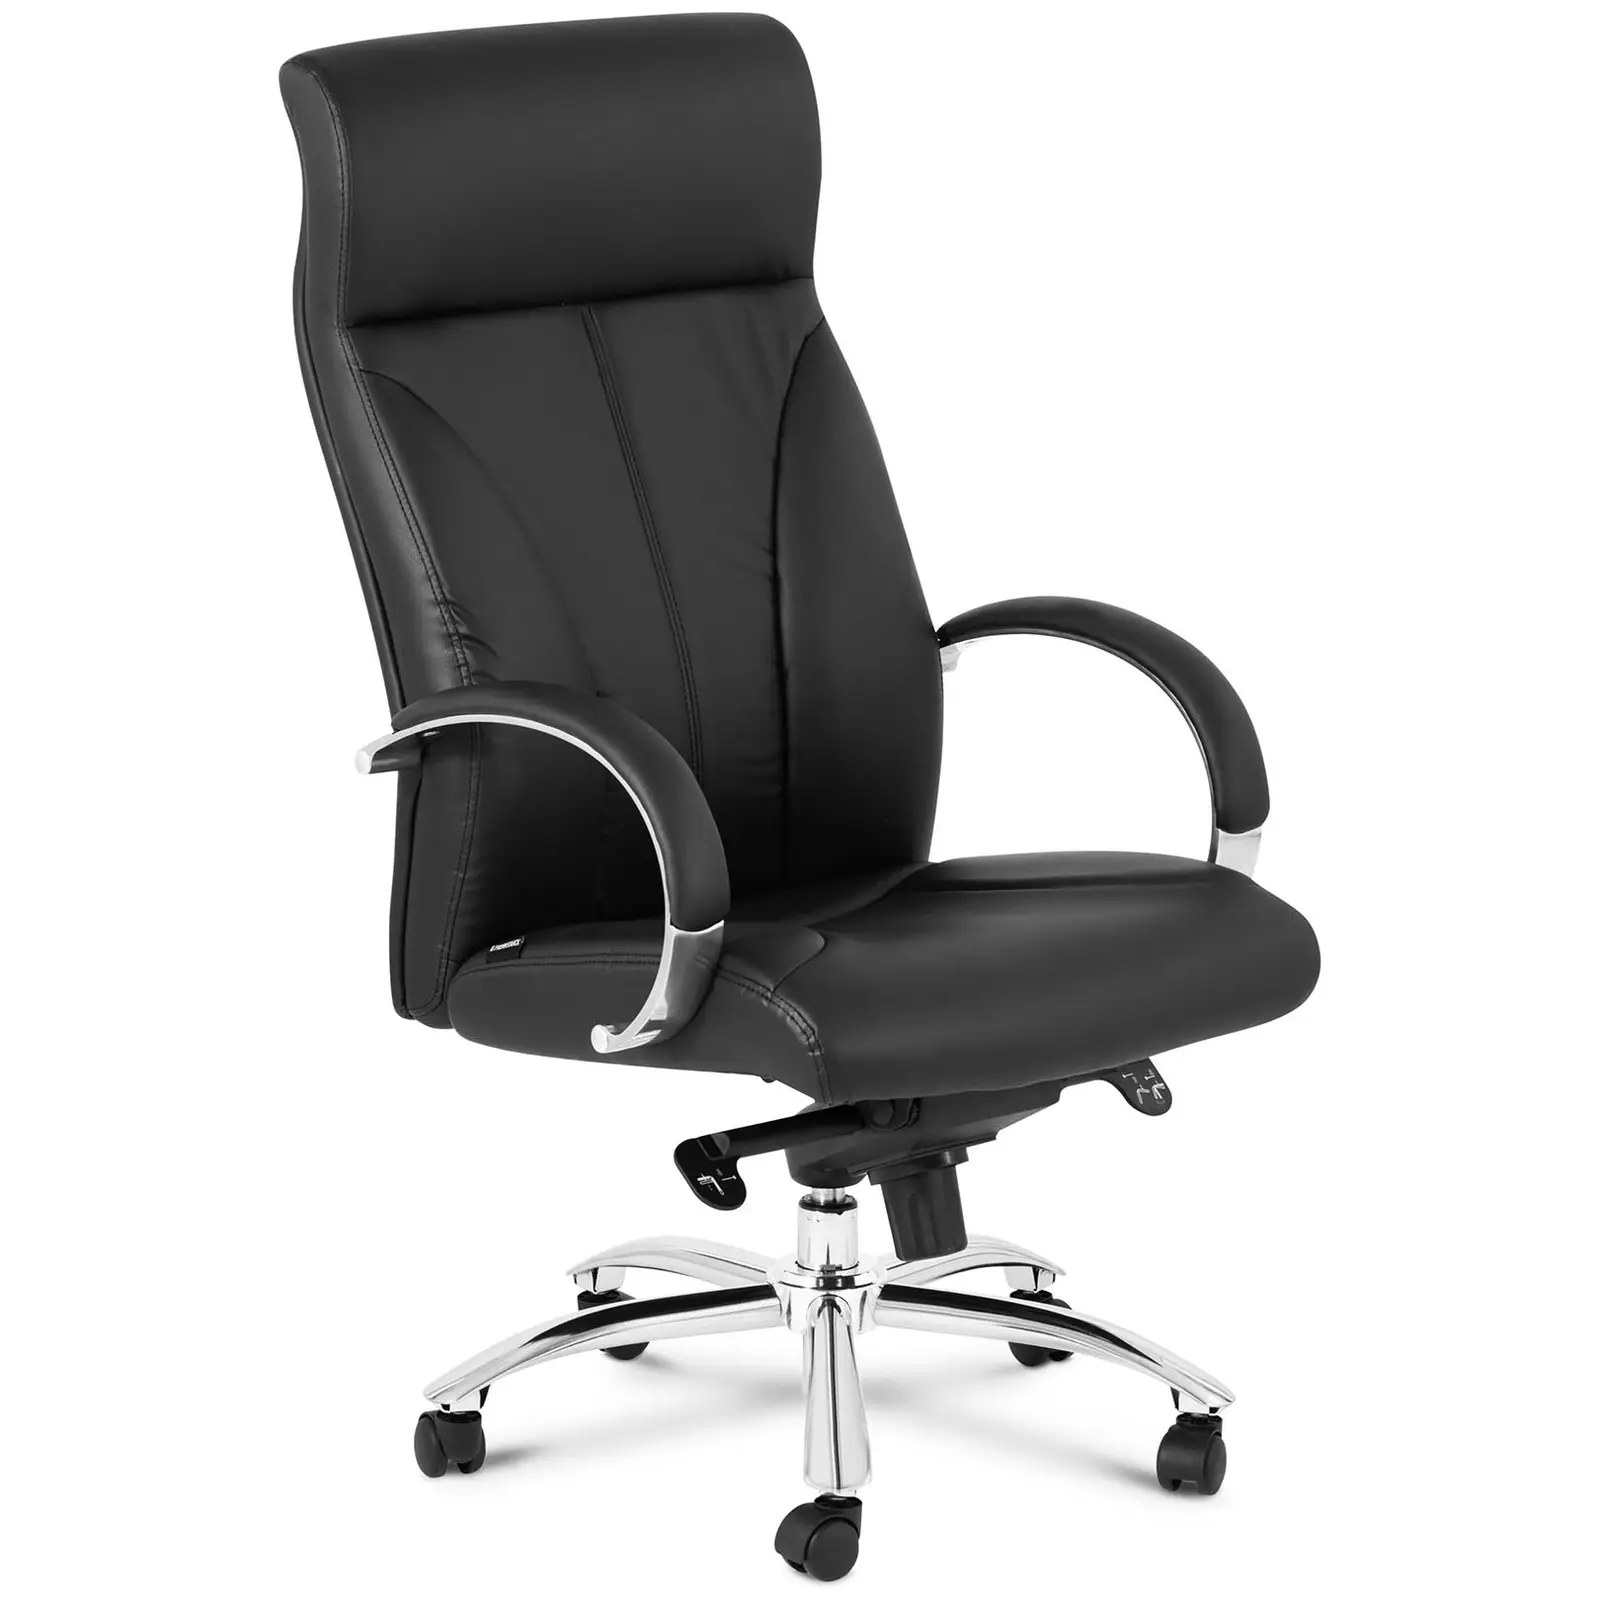 Executive Office Chair - synthetic leather backrest - black - 100 kg